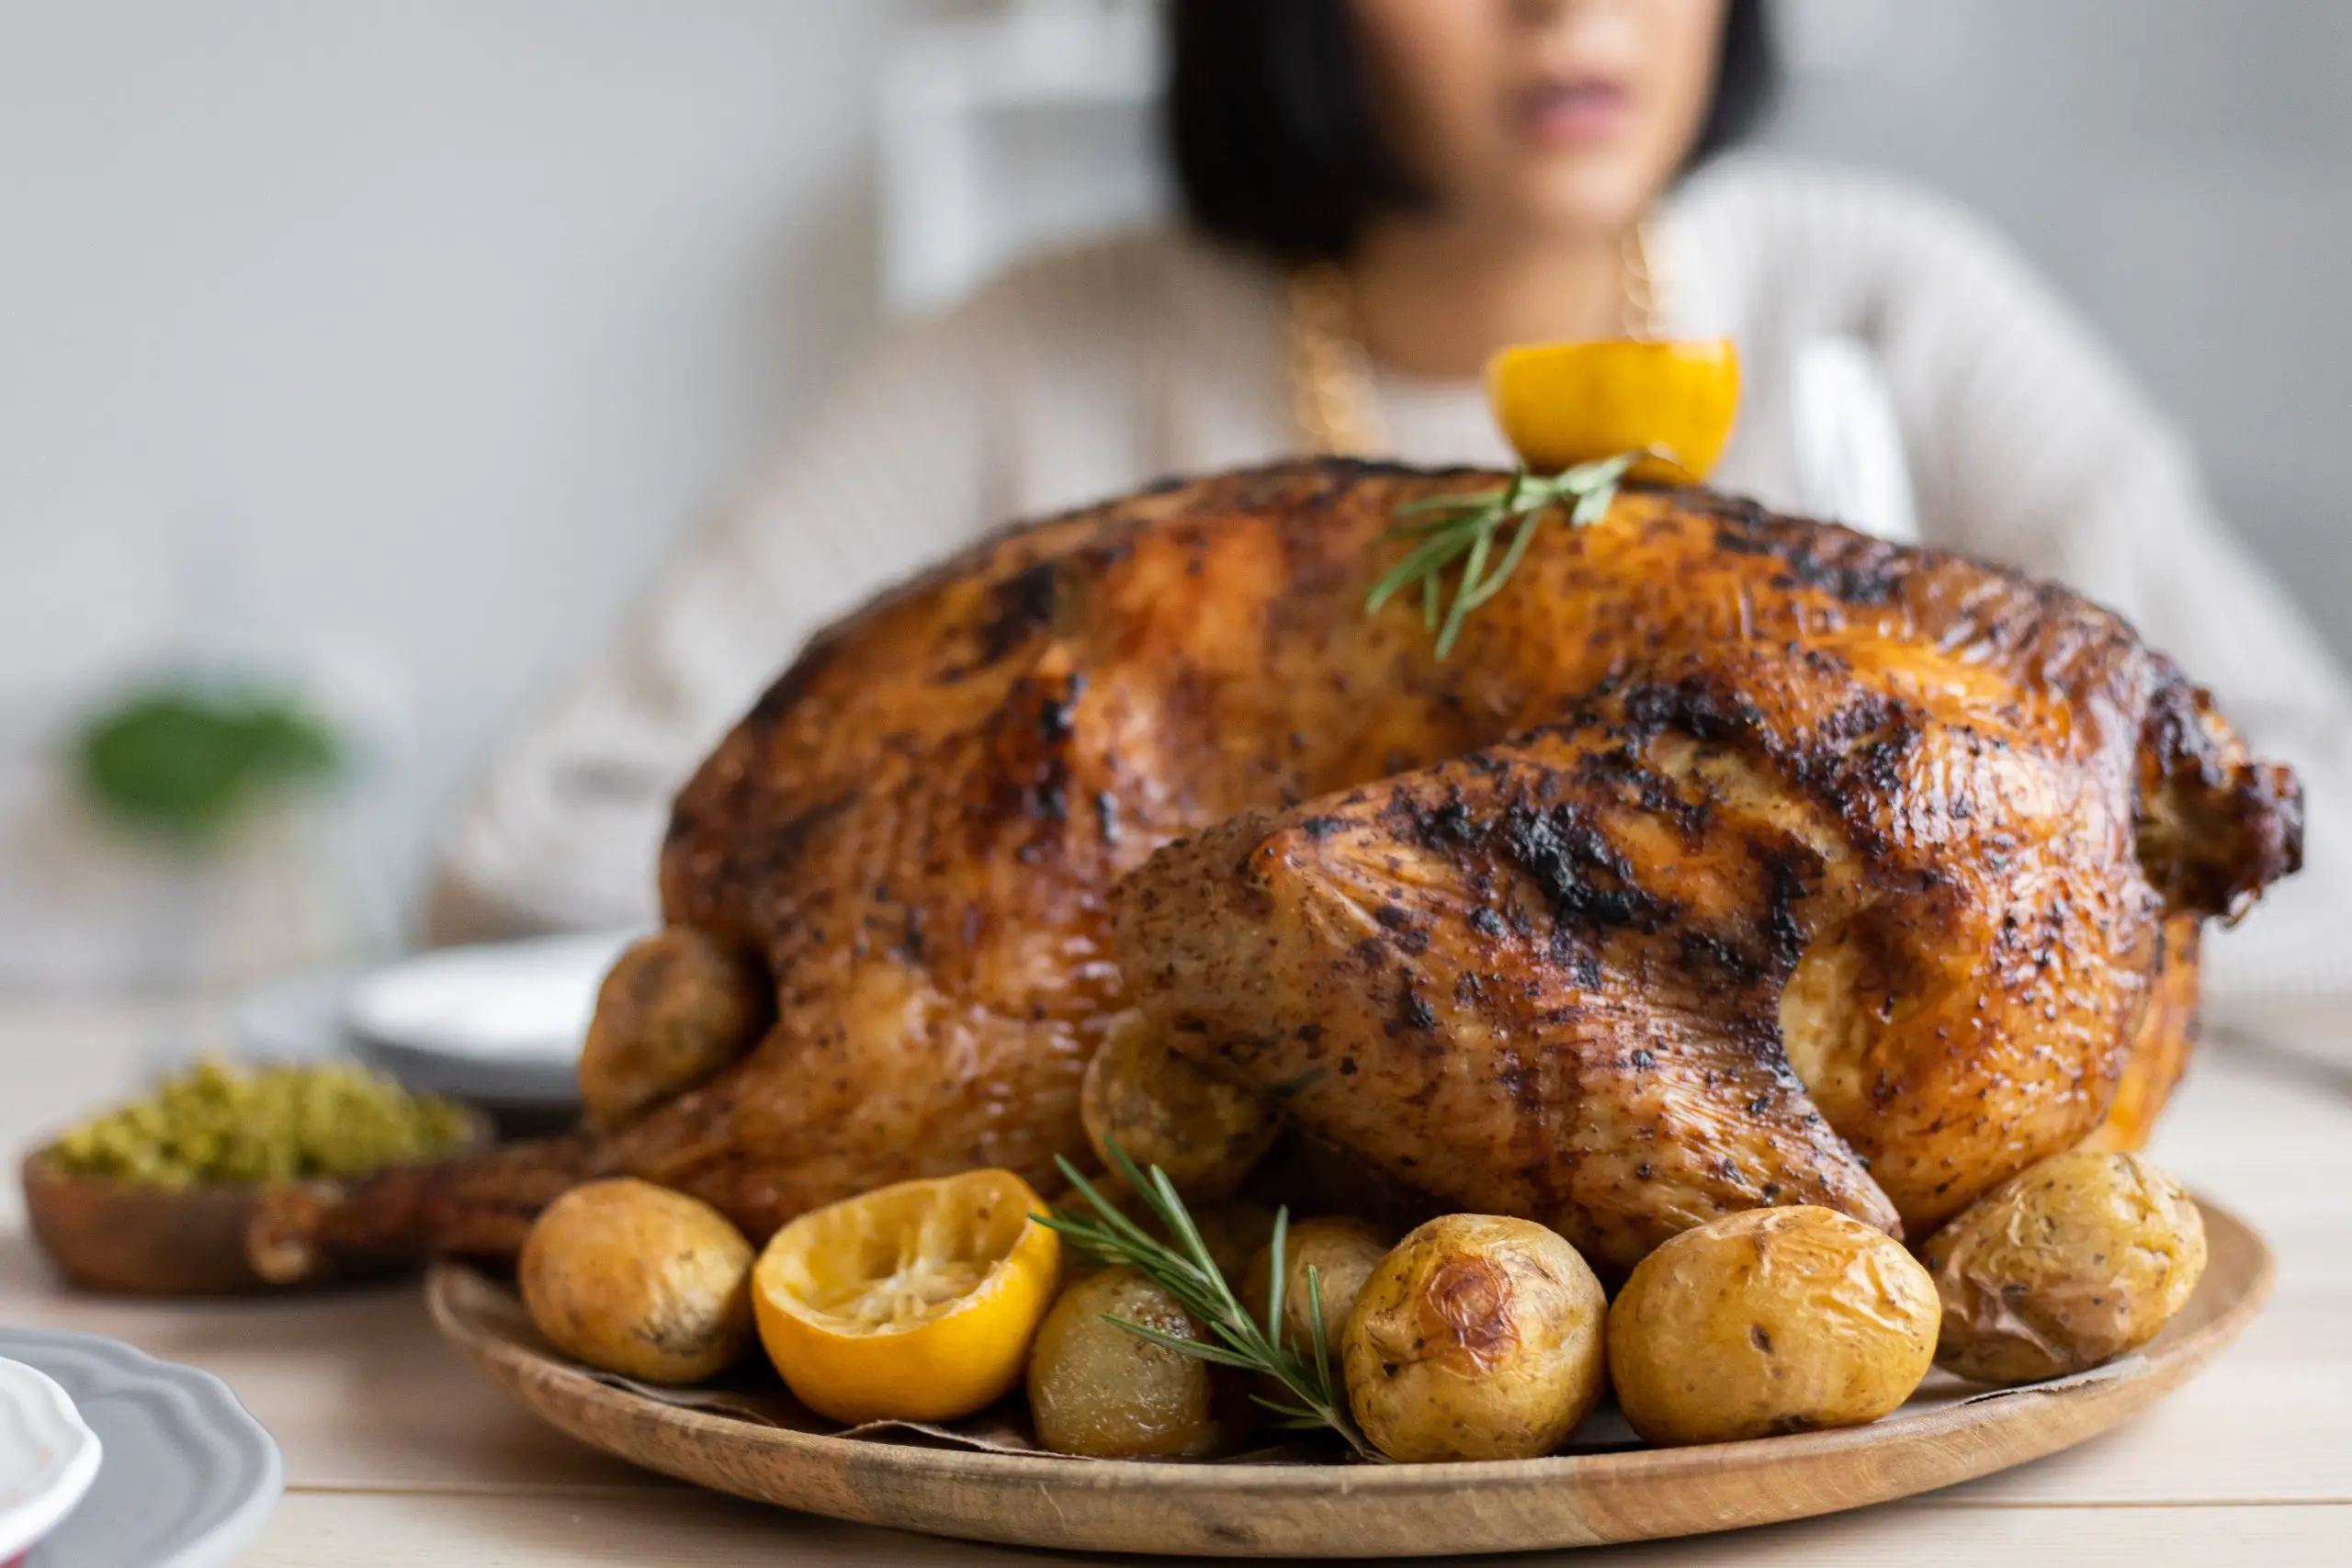 Can I cook a whole turkey in an Air Fryer?